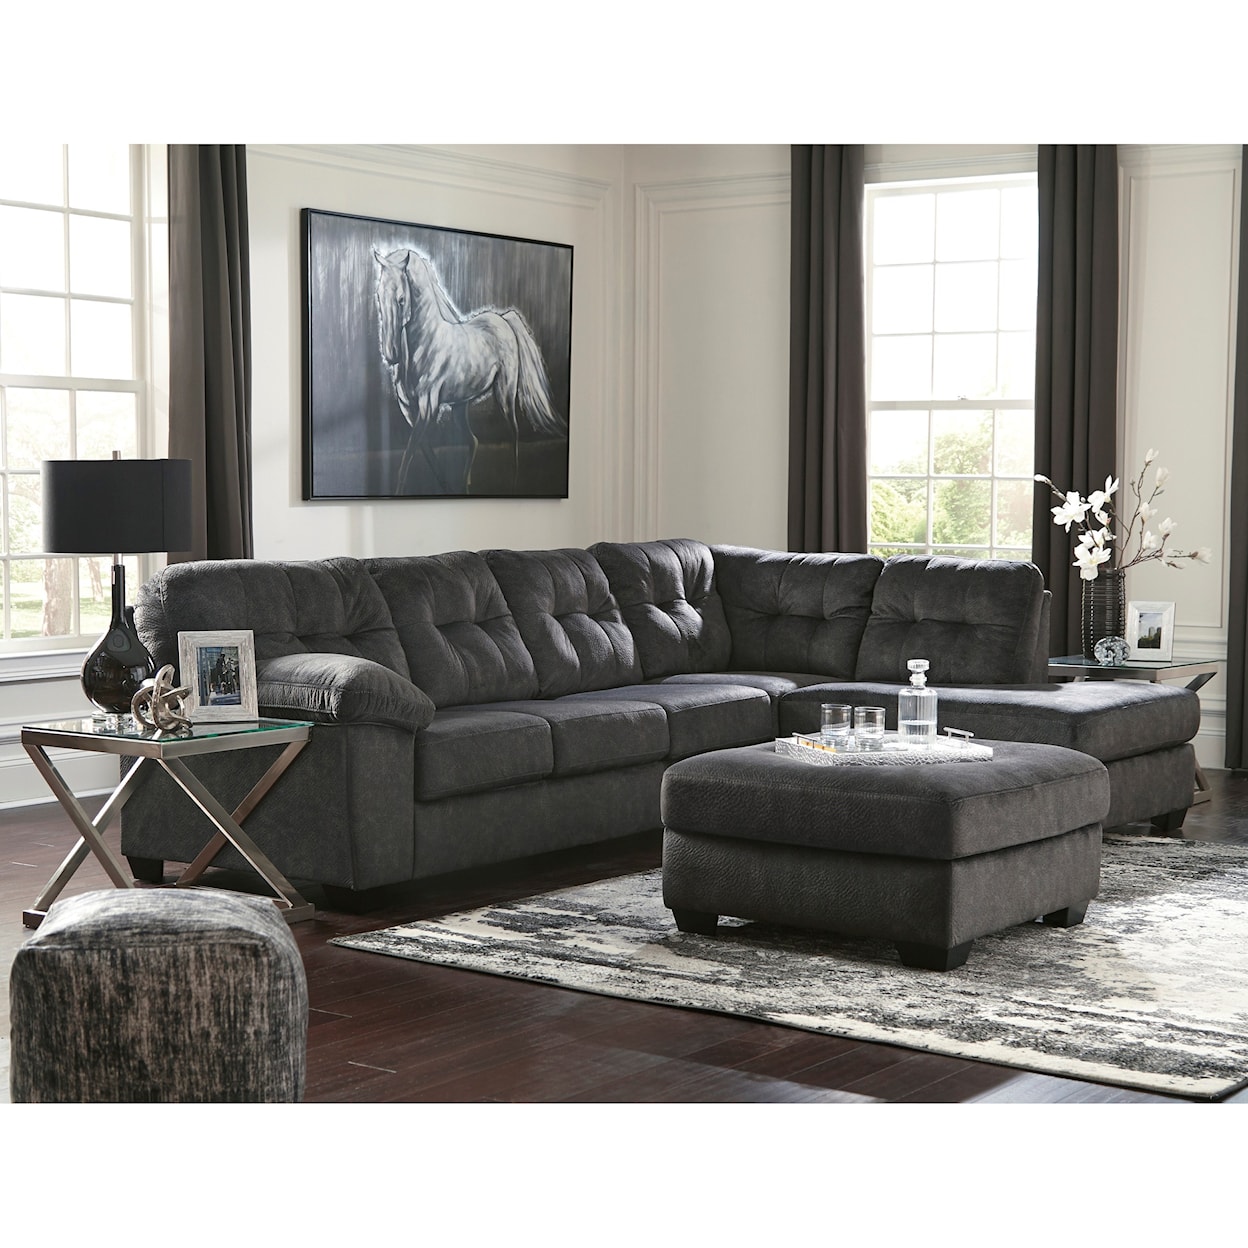 Signature Design by Ashley Accrington Sectional with Right Chaise